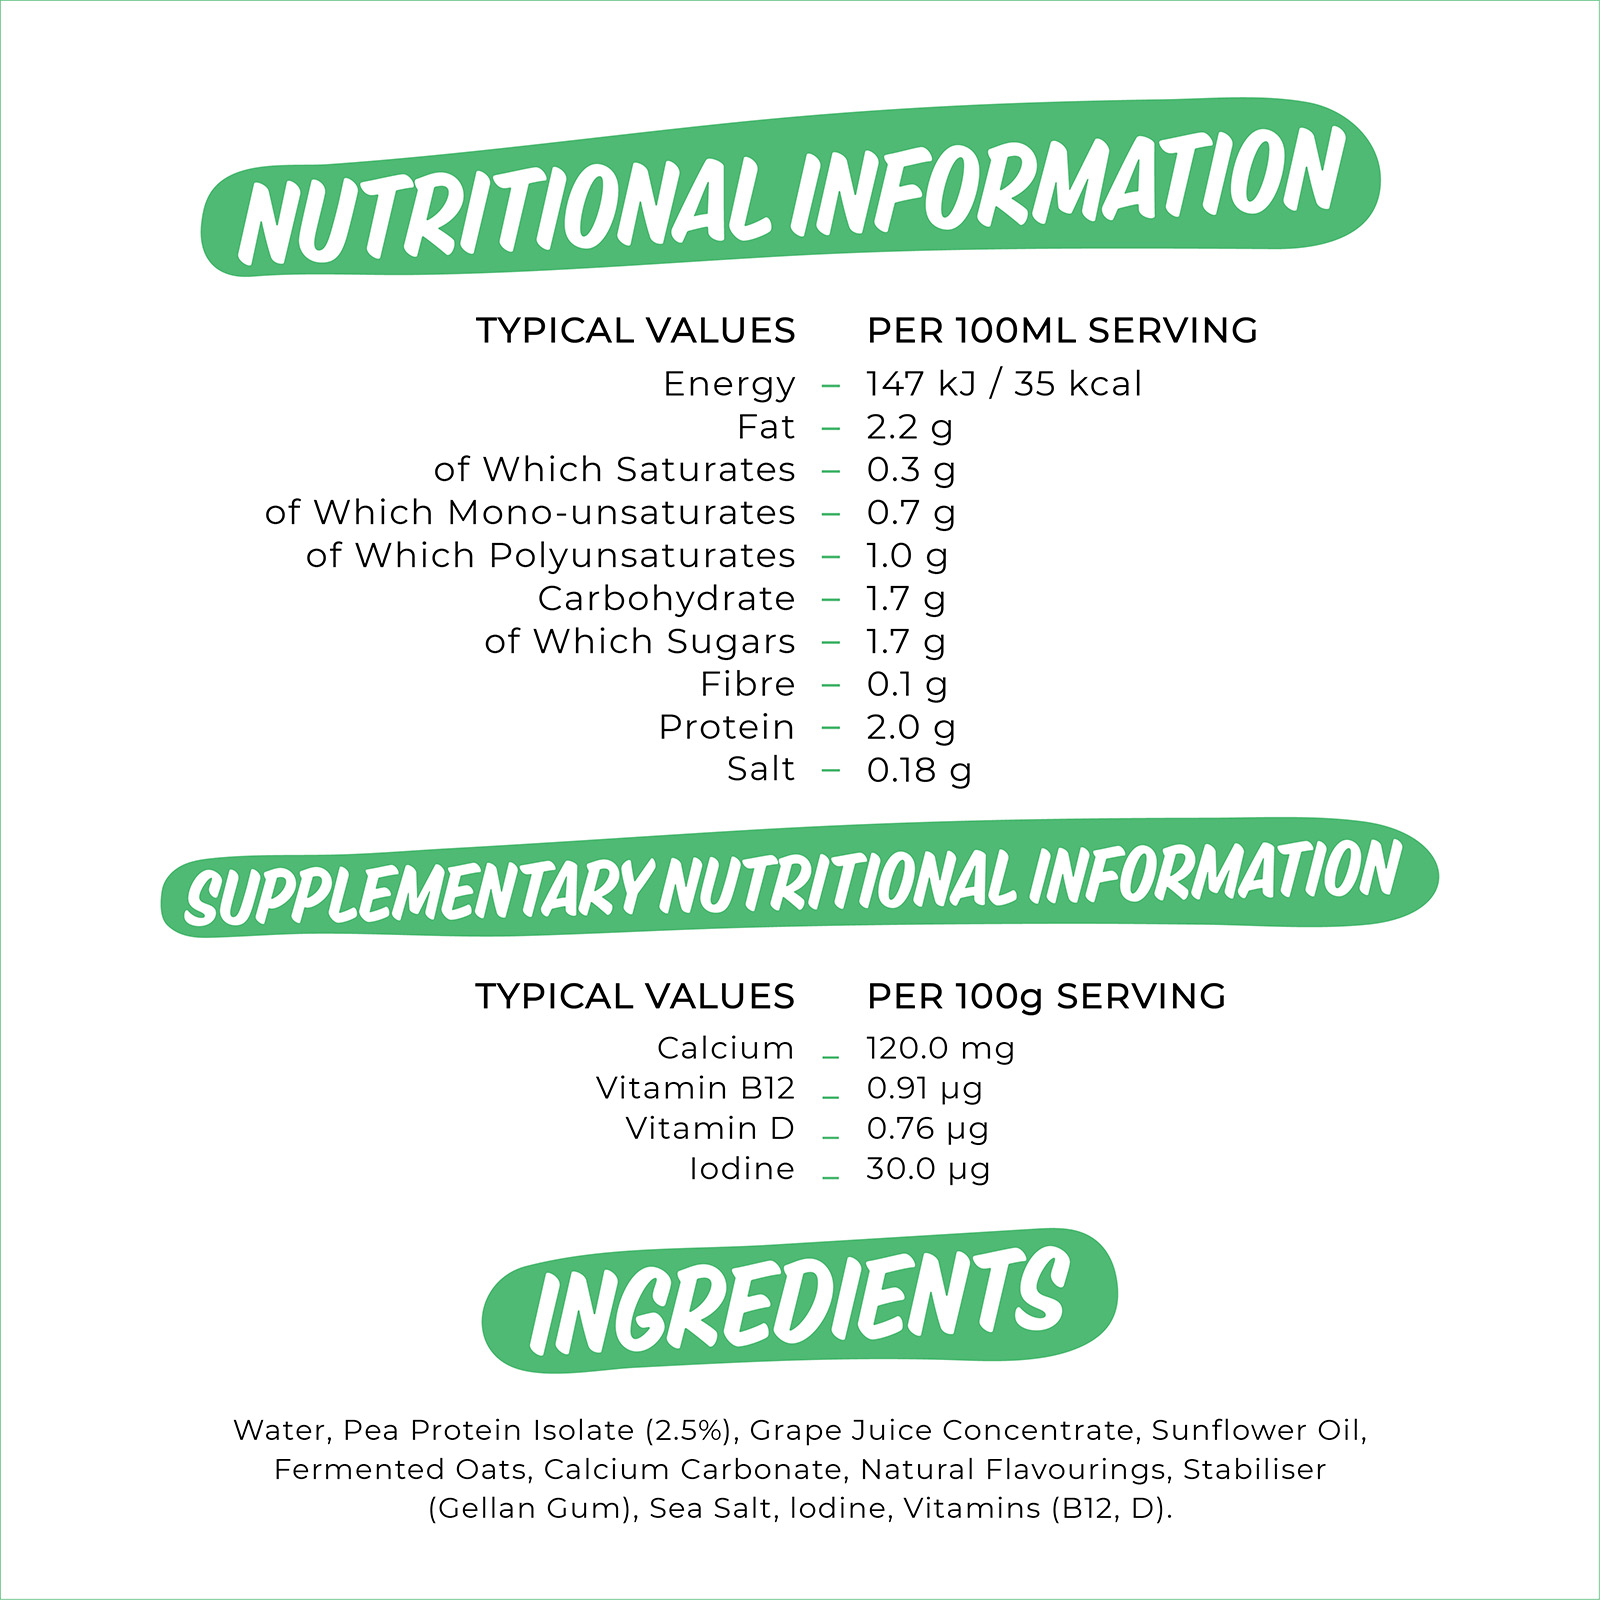 

                          TYPICAL VALUES PER 100ML SERVING Energy 147 kJ / 35 kcal Fat 2.2 g of Which Saturates 0.3 g of Which Mono-unsatu rates 0.7 g of Which Polyunsaturates 1.0 g Carbohydrate 1.7 g of Which Sugars 1.7 g Fibre 0.1 g Protein 2.0 g Salt 0.18 g 
                          gUPPLEMENTARY NUTRITIONAL INFORMATION 
                          TYPICAL VALUES PER 100g SERVING Calcium _ 120.0 mg Vitamin B12 _ 0.91 pg Vitamin D _ 0.76 pg Iodine _ 30.0 pg 

                          Water, Pea Protein Isolate (2.5%), Grape Juice Concentrate, Sunflower Oil, Fermented Oats, Calcium Carbonate, Natural Flavourings, Stabiliser (Gellan Gum), Sea Salt, Iodine, Vitamins (B12, D). 

                          